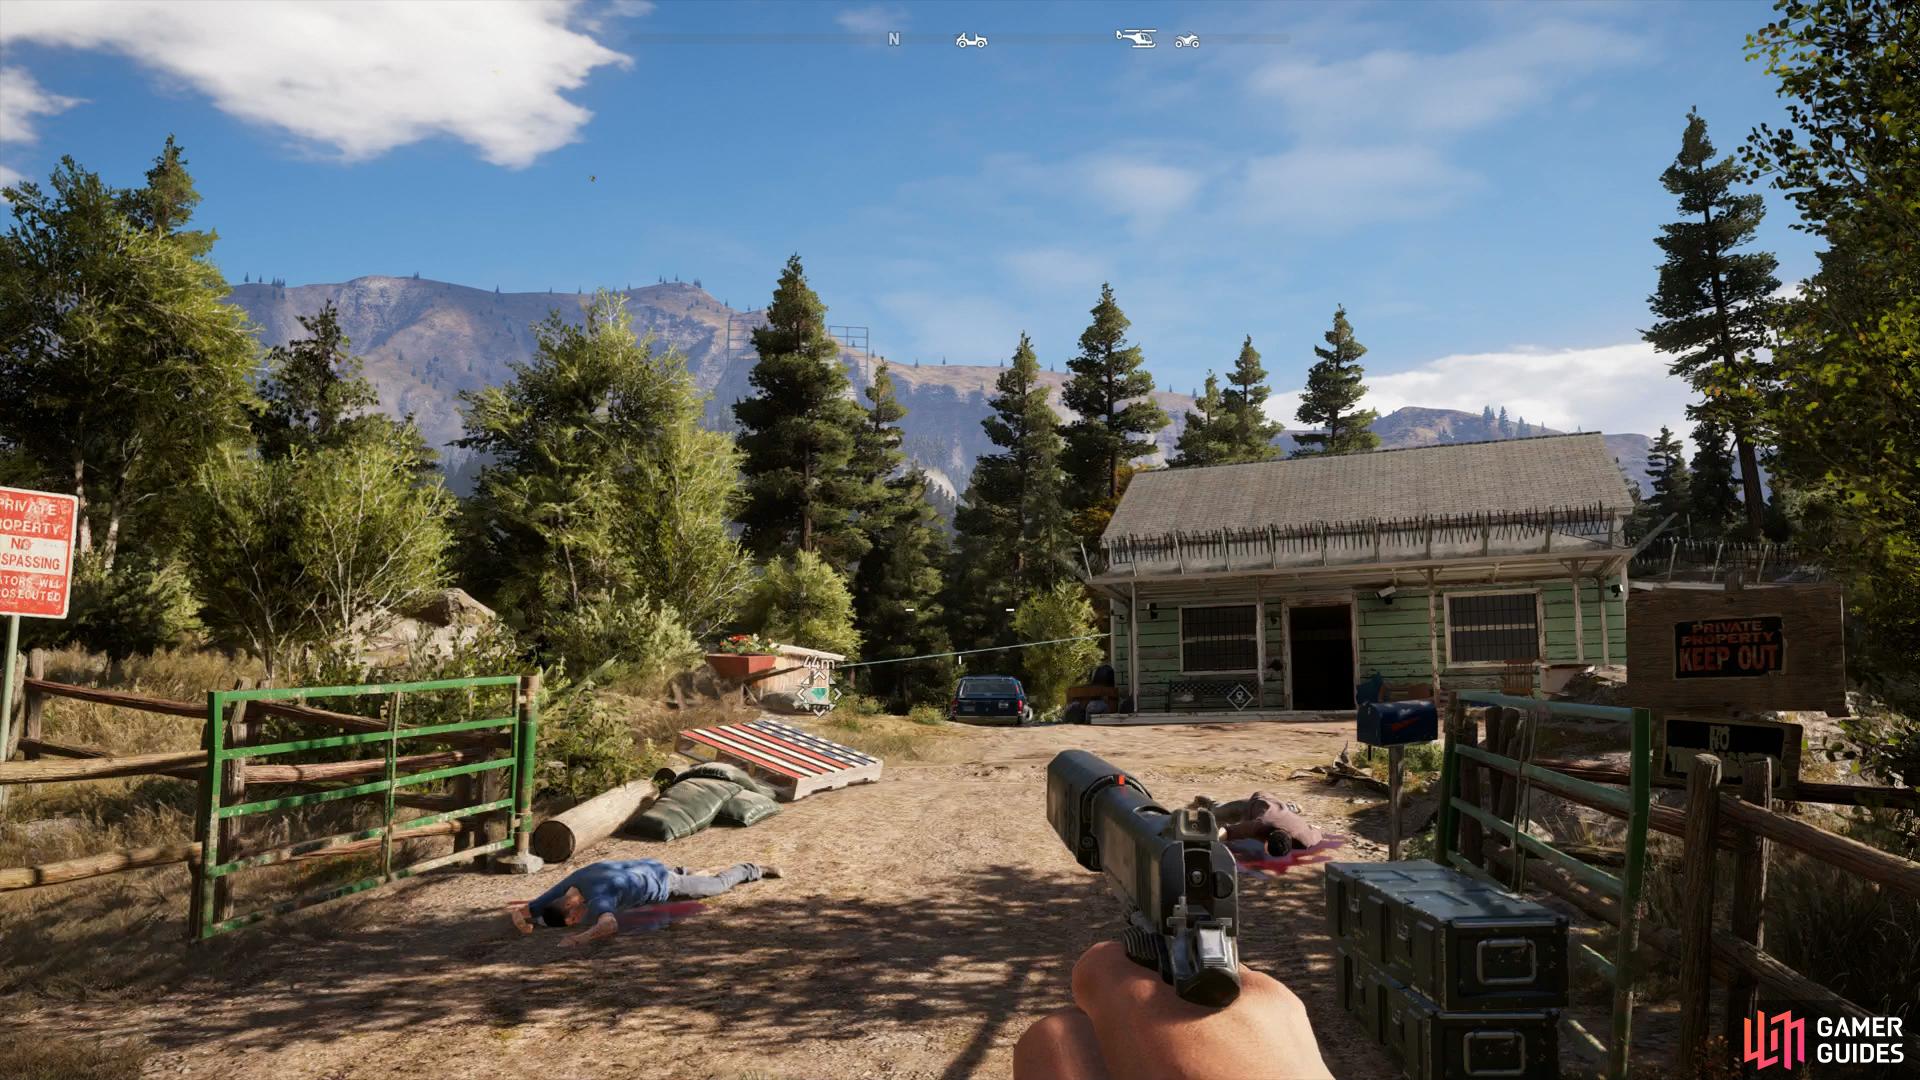 far cry 5 trophy guide ps4